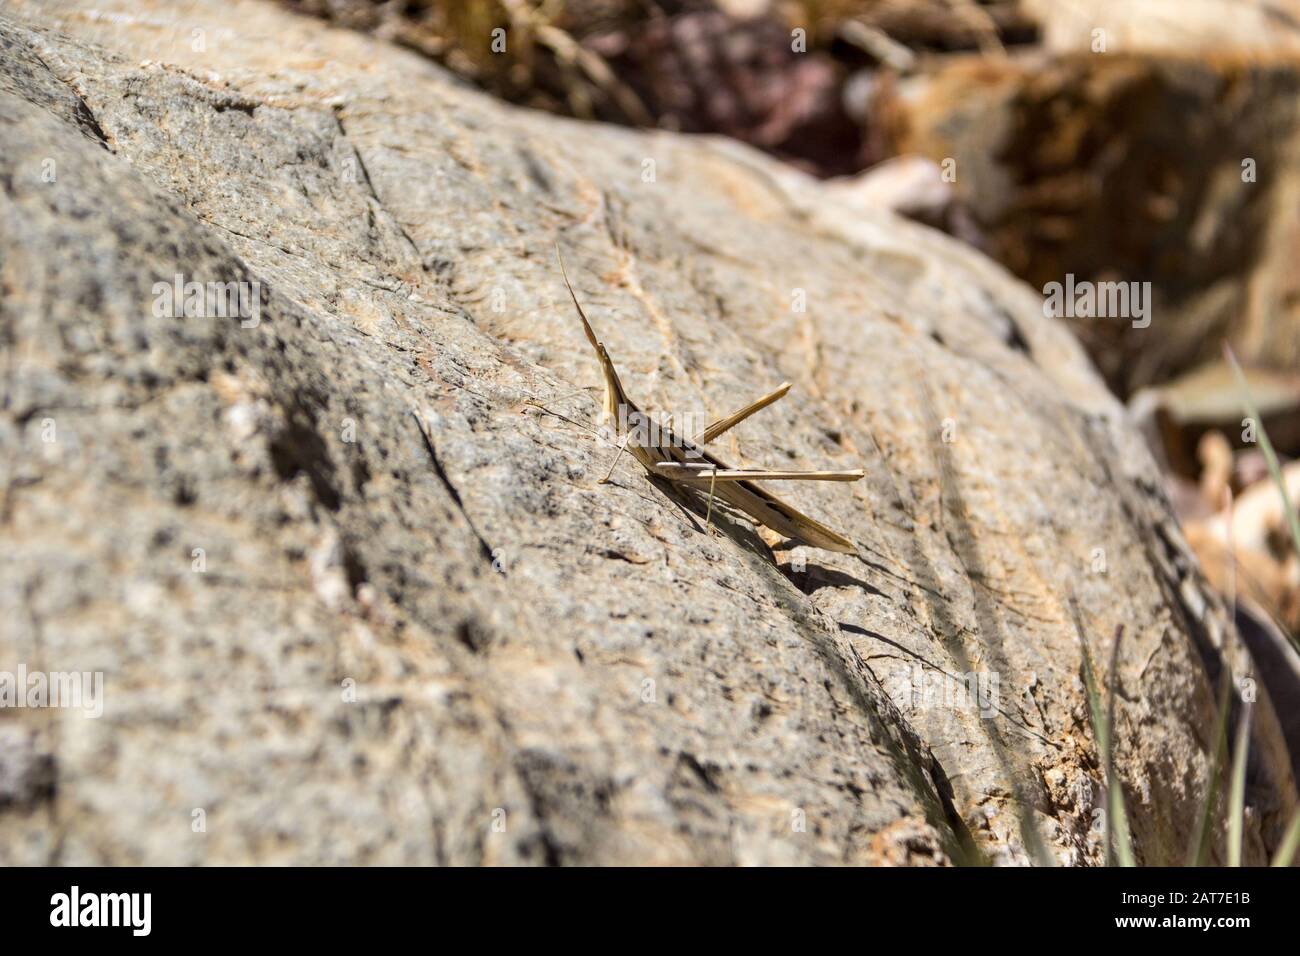 A brown cone-headed grasshopper (Acrida ungarica) on a stone, Namibia, Africa Stock Photo